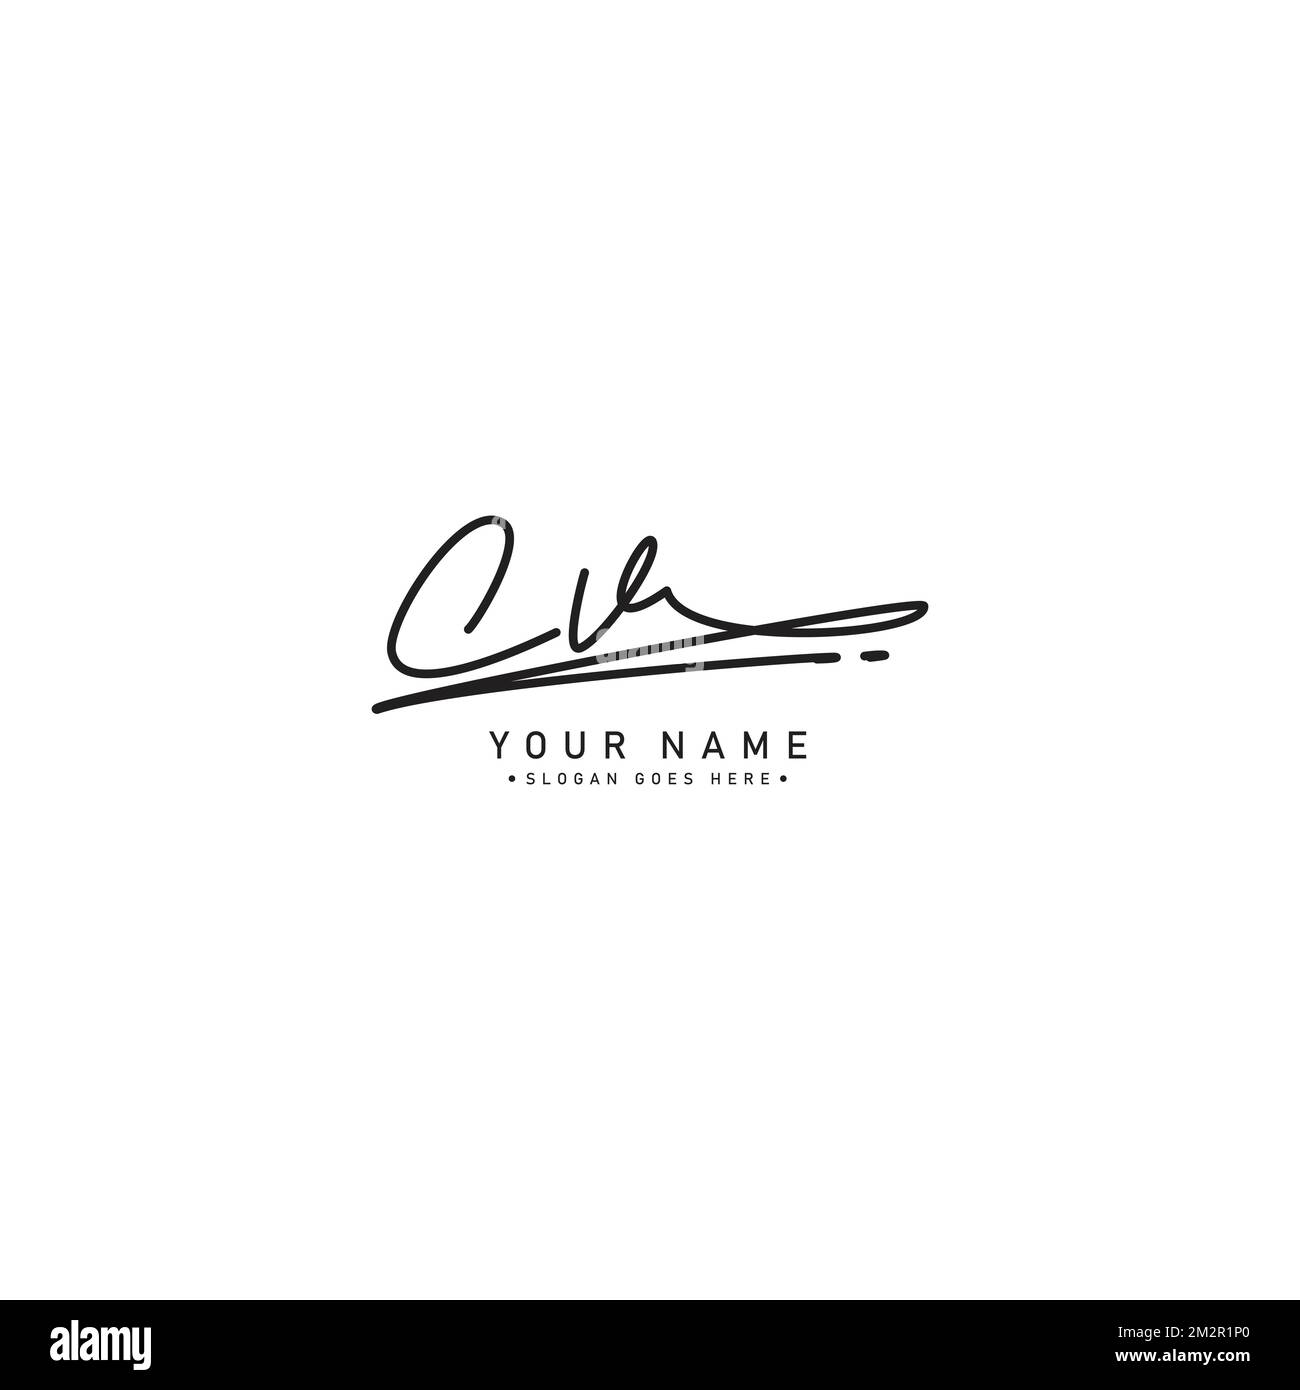 CV Handwritten Signature logo - Vector Logo Template for Beauty, Fashion and Photography Business Stock Vector